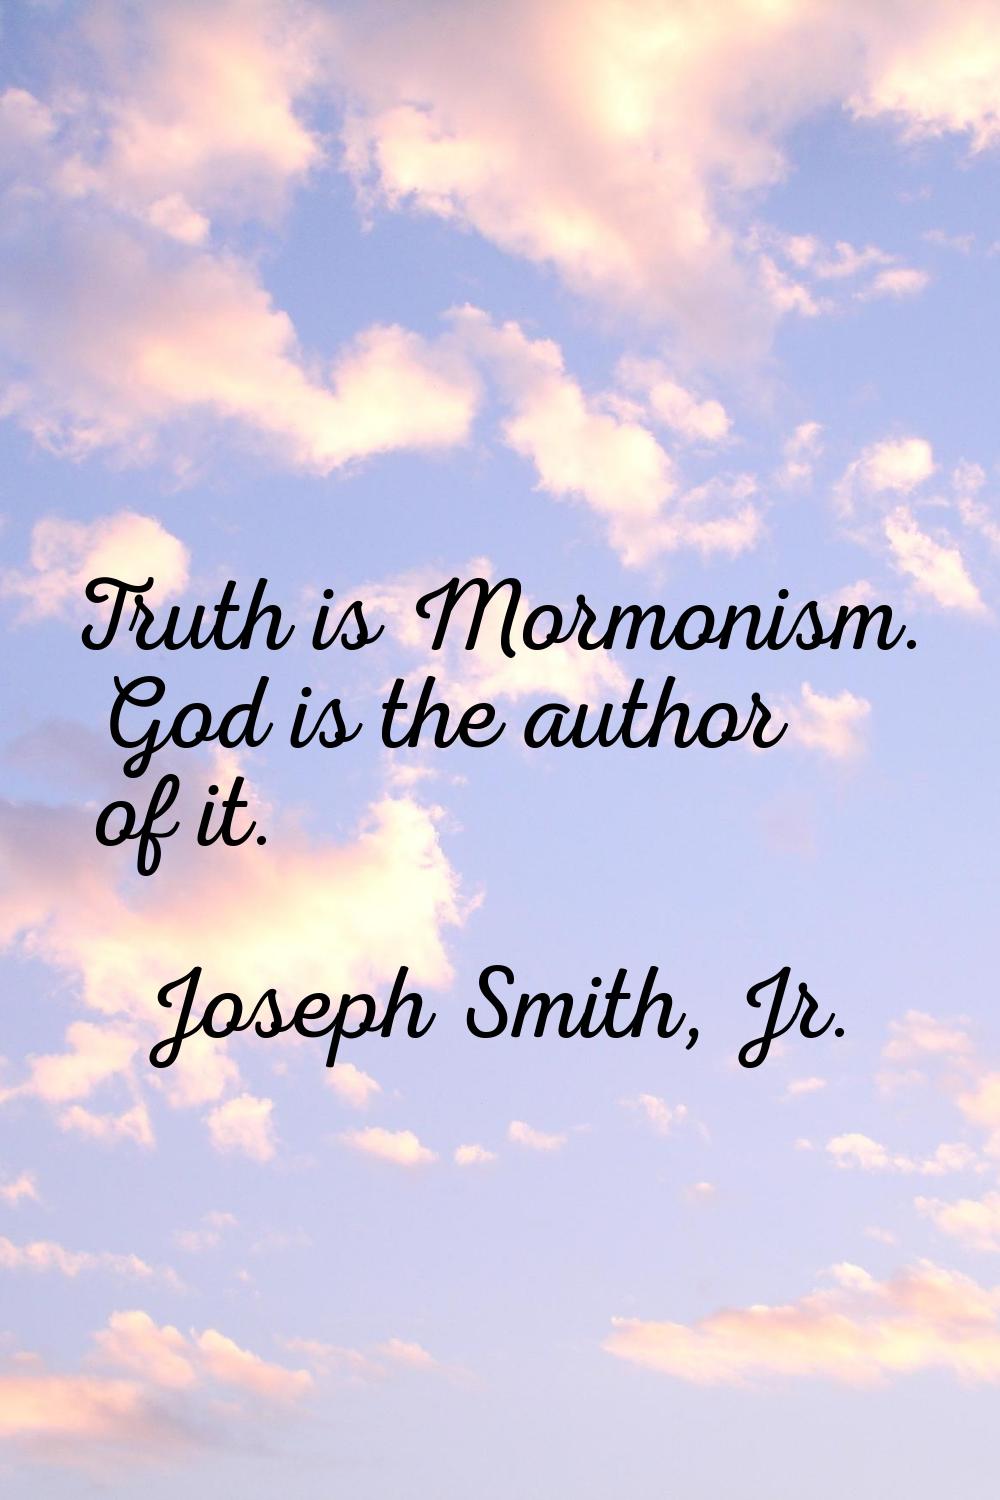 Truth is Mormonism. God is the author of it.